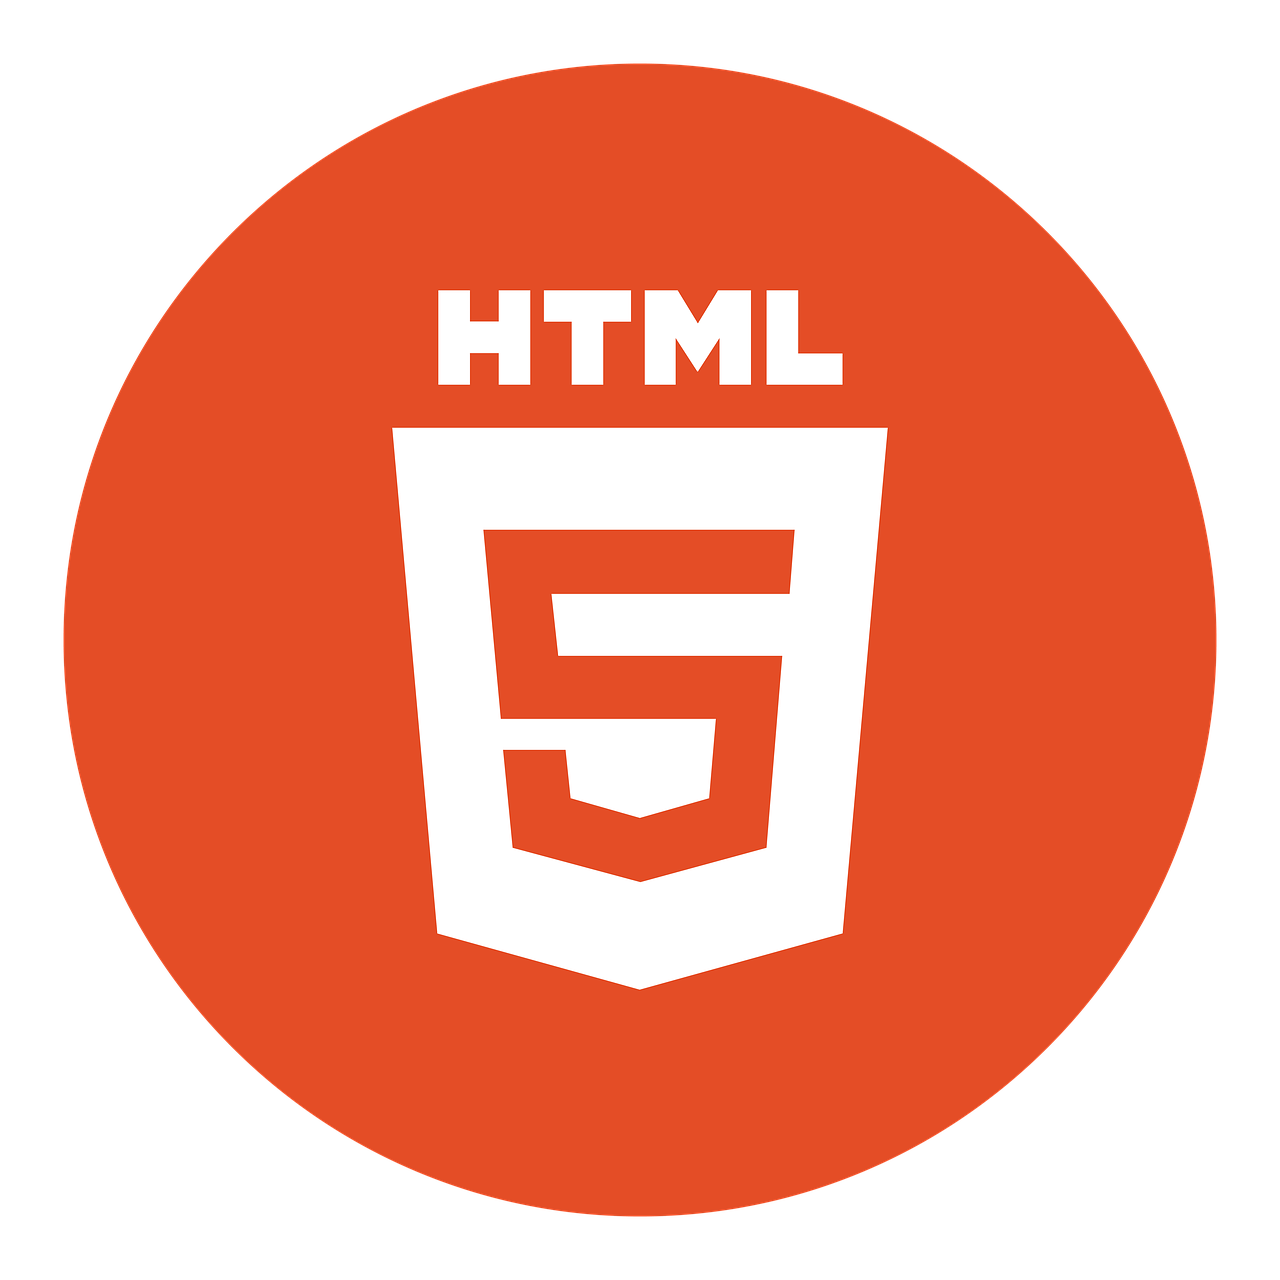 An icon depicting Hypertext Markup language 5